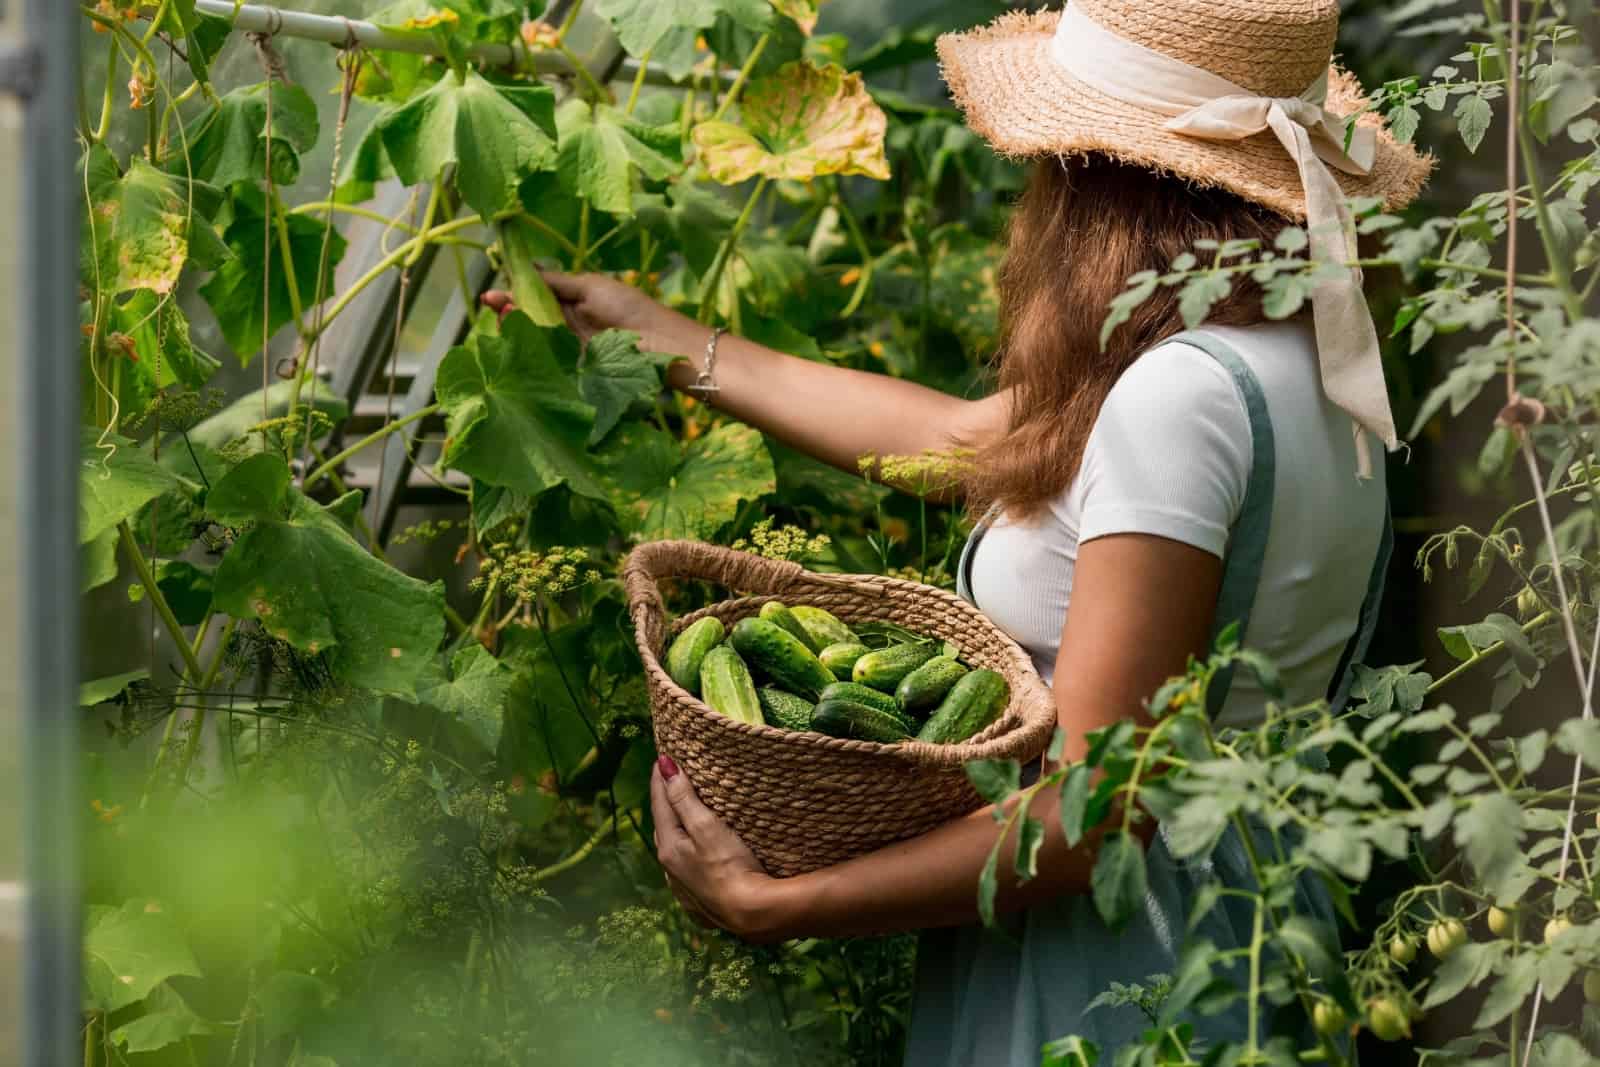 A farmer woman in a cotton apron tears cucumbers in a greenhouse into a wicker basket